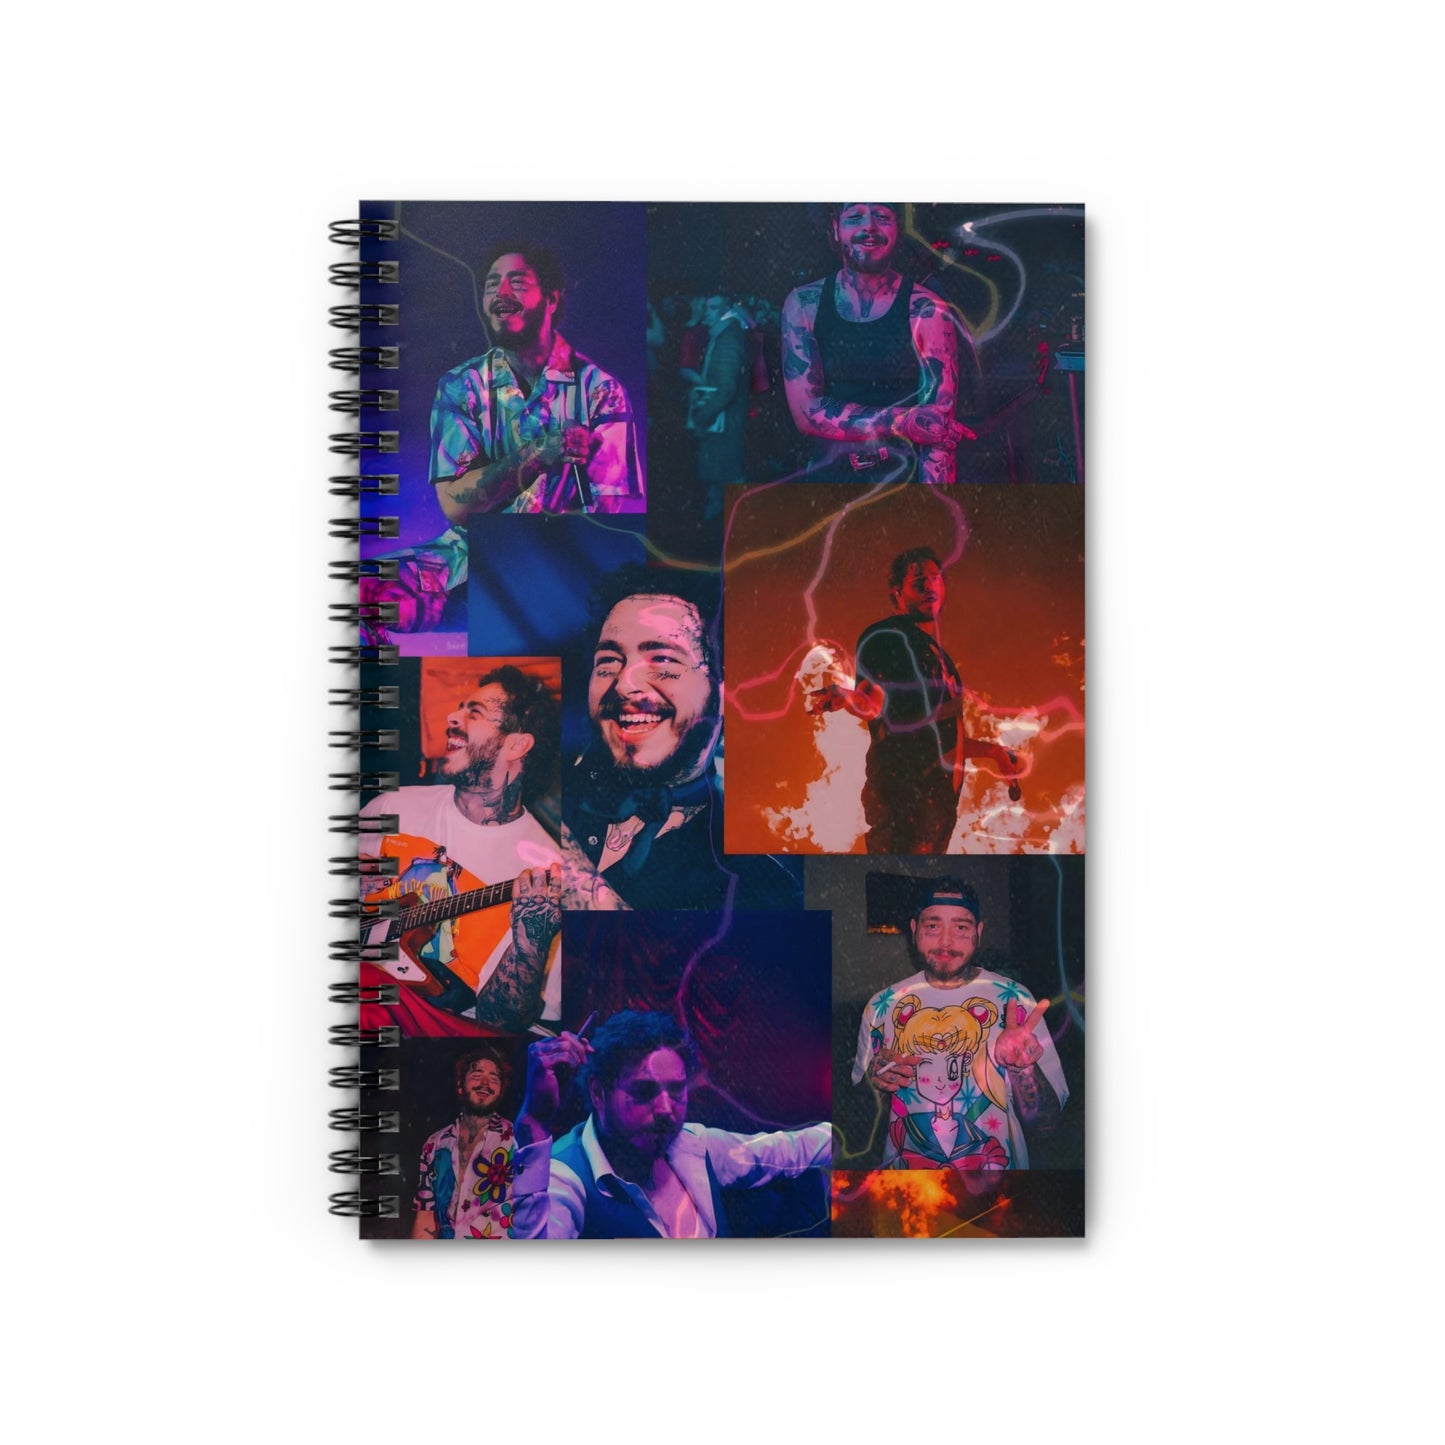 Post Malone Lightning Photo Collage Ruled Line Spiral Notebook